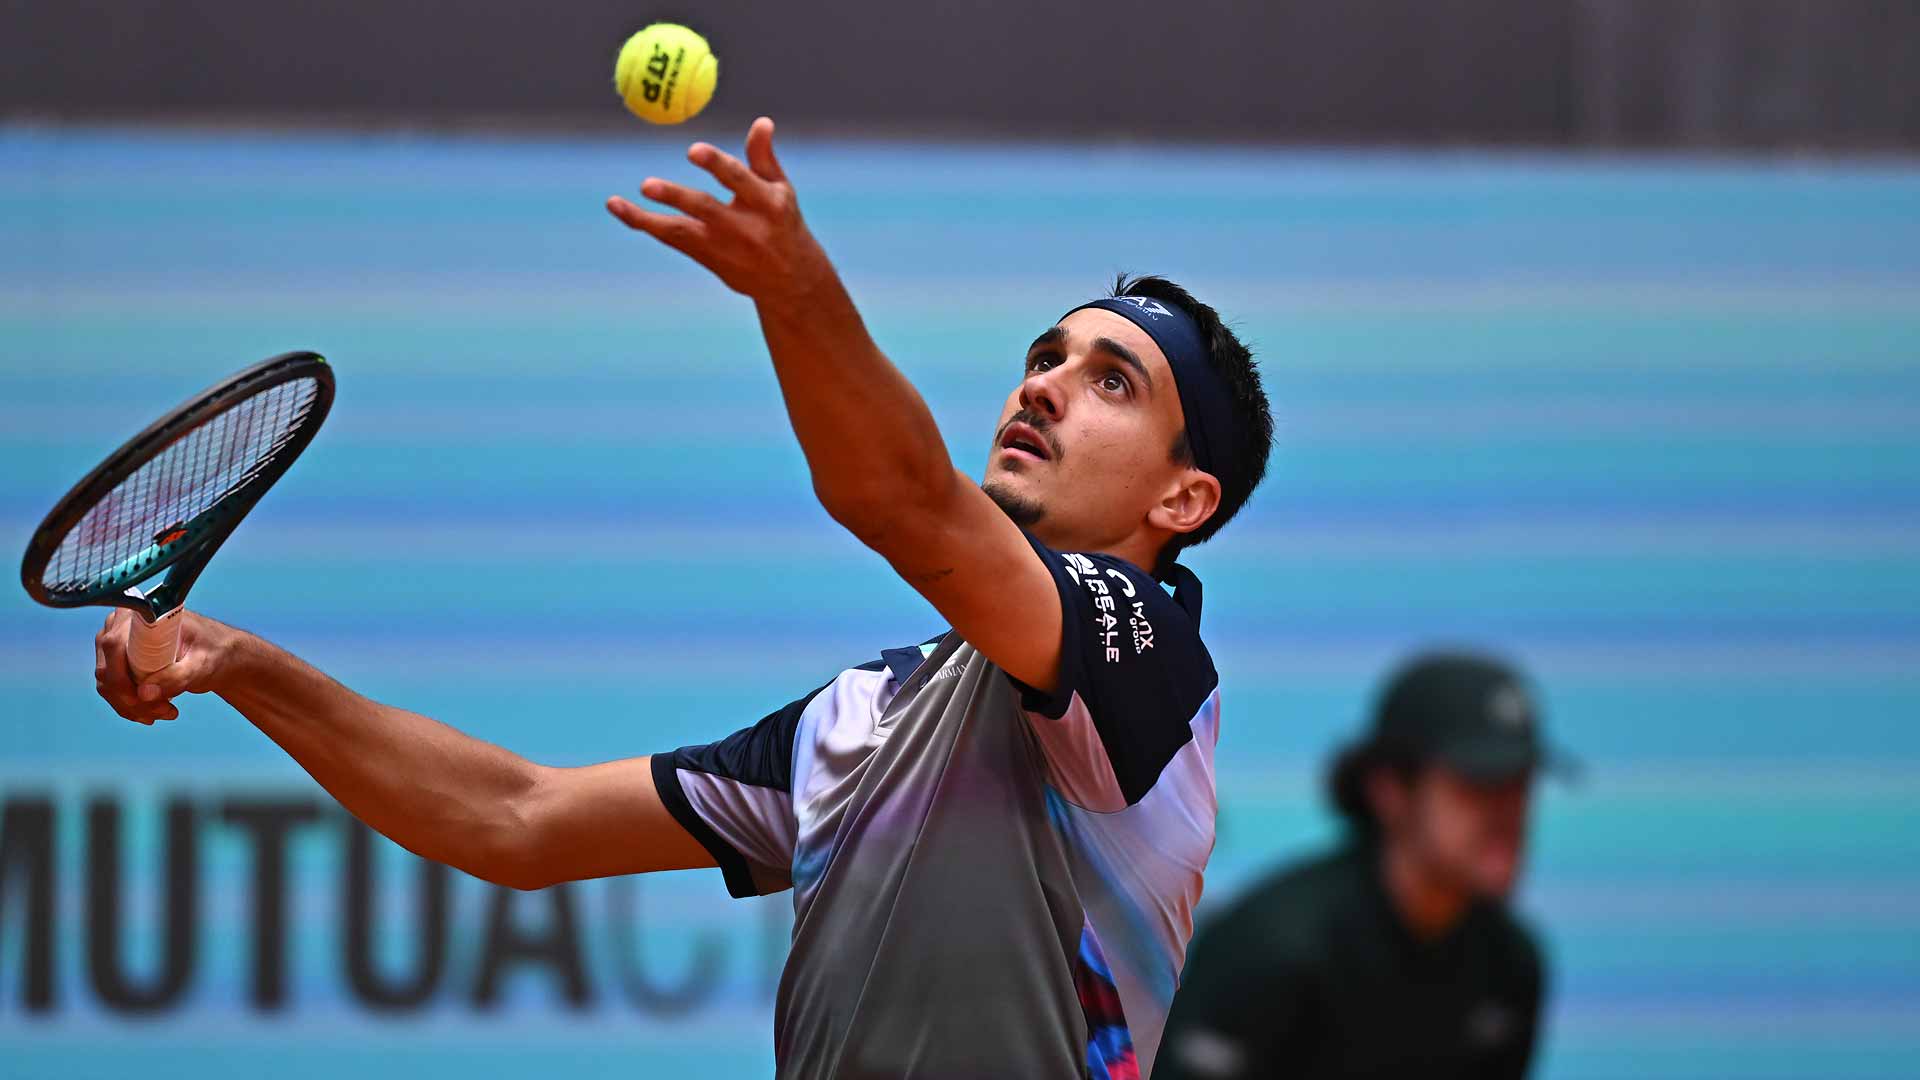 Lorenzo Sonego in action on Thursday at the Mutua Madrid Open.